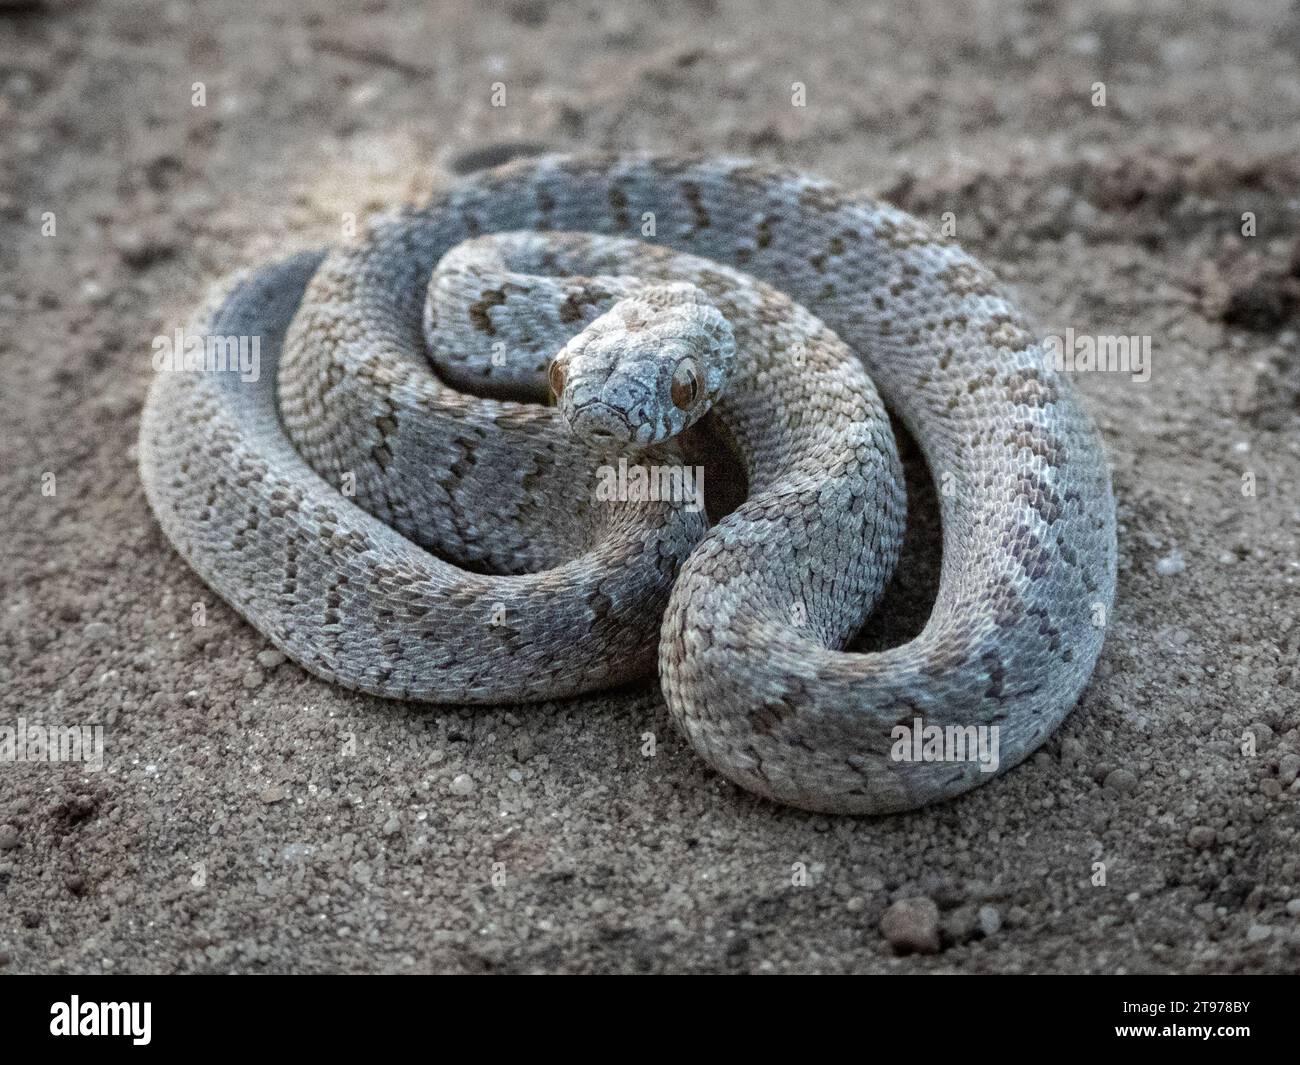 A rhombic Egg-Eater (Dasypeltis scabra), a harmless snake from South Africa slithering through sandy terrain Stock Photo